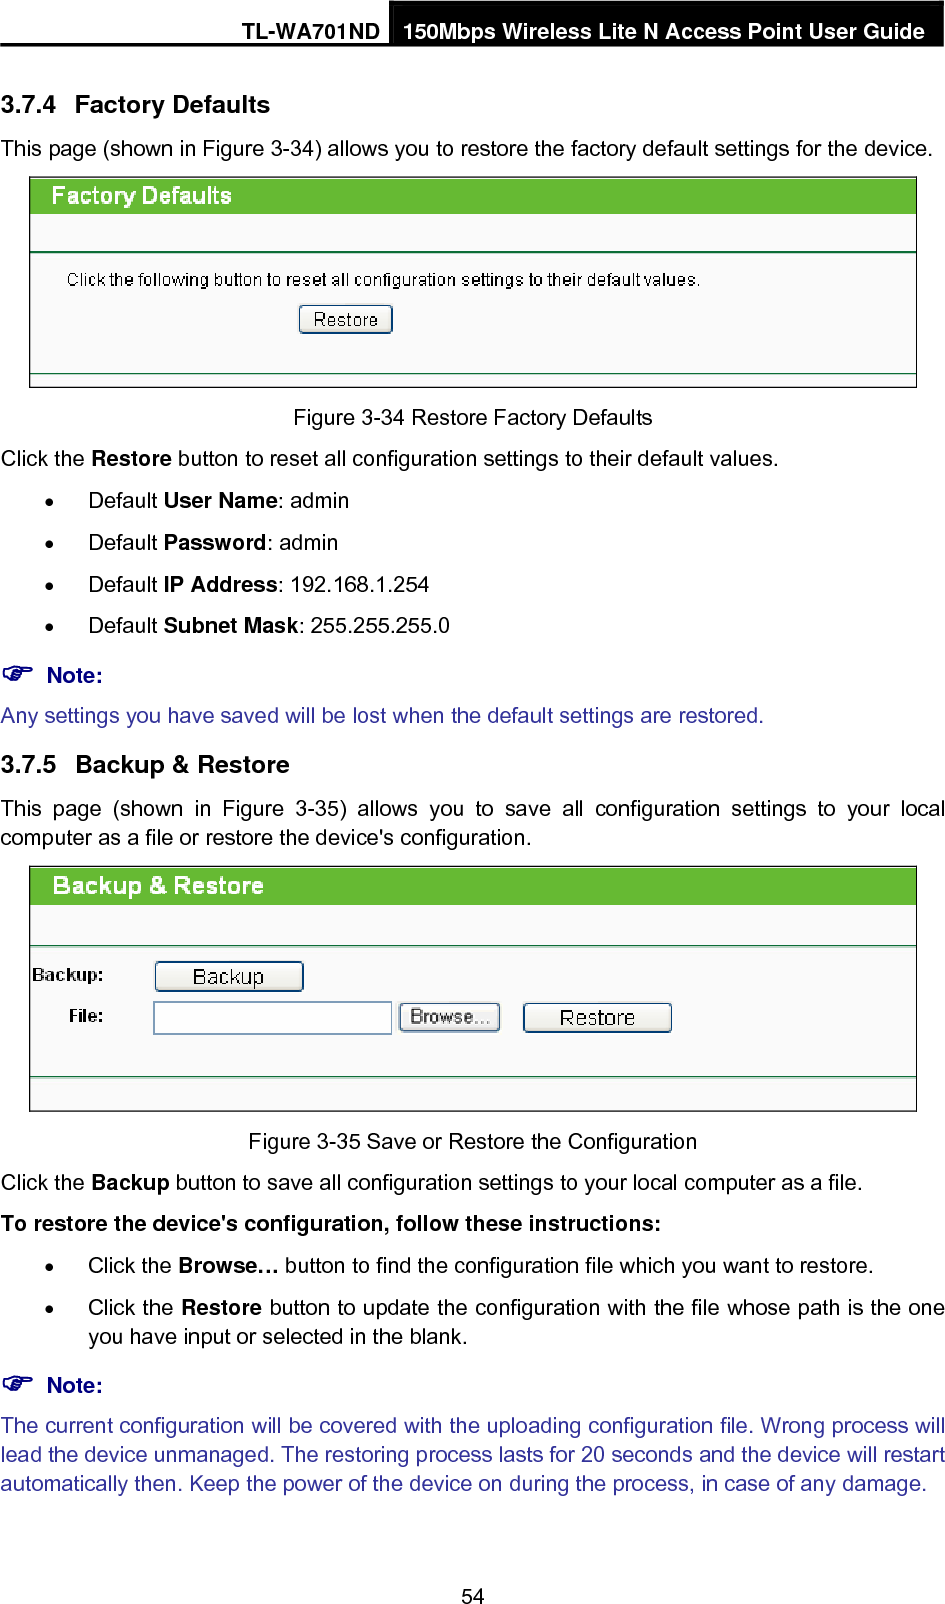 TL-WA701ND 150Mbps Wireless Lite N Access Point User Guide 3.7.4  Factory Defaults This page (shown in Figure 3-34) allows you to restore the factory default settings for the device.  Figure 3-34 Restore Factory Defaults Click the Restore button to reset all configuration settings to their default values.   • Default User Name: admin • Default Password: admin • Default IP Address: 192.168.1.254 • Default Subnet Mask: 255.255.255.0 ) Note: Any settings you have saved will be lost when the default settings are restored. 3.7.5  Backup &amp; Restore This page (shown in Figure 3-35) allows you to save all configuration settings to your local computer as a file or restore the device&apos;s configuration.  Figure 3-35 Save or Restore the Configuration Click the Backup button to save all configuration settings to your local computer as a file.   To restore the device&apos;s configuration, follow these instructions: • Click the Browse… button to find the configuration file which you want to restore.   • Click the Restore button to update the configuration with the file whose path is the one you have input or selected in the blank. ) Note: The current configuration will be covered with the uploading configuration file. Wrong process will lead the device unmanaged. The restoring process lasts for 20 seconds and the device will restart automatically then. Keep the power of the device on during the process, in case of any damage. 54 